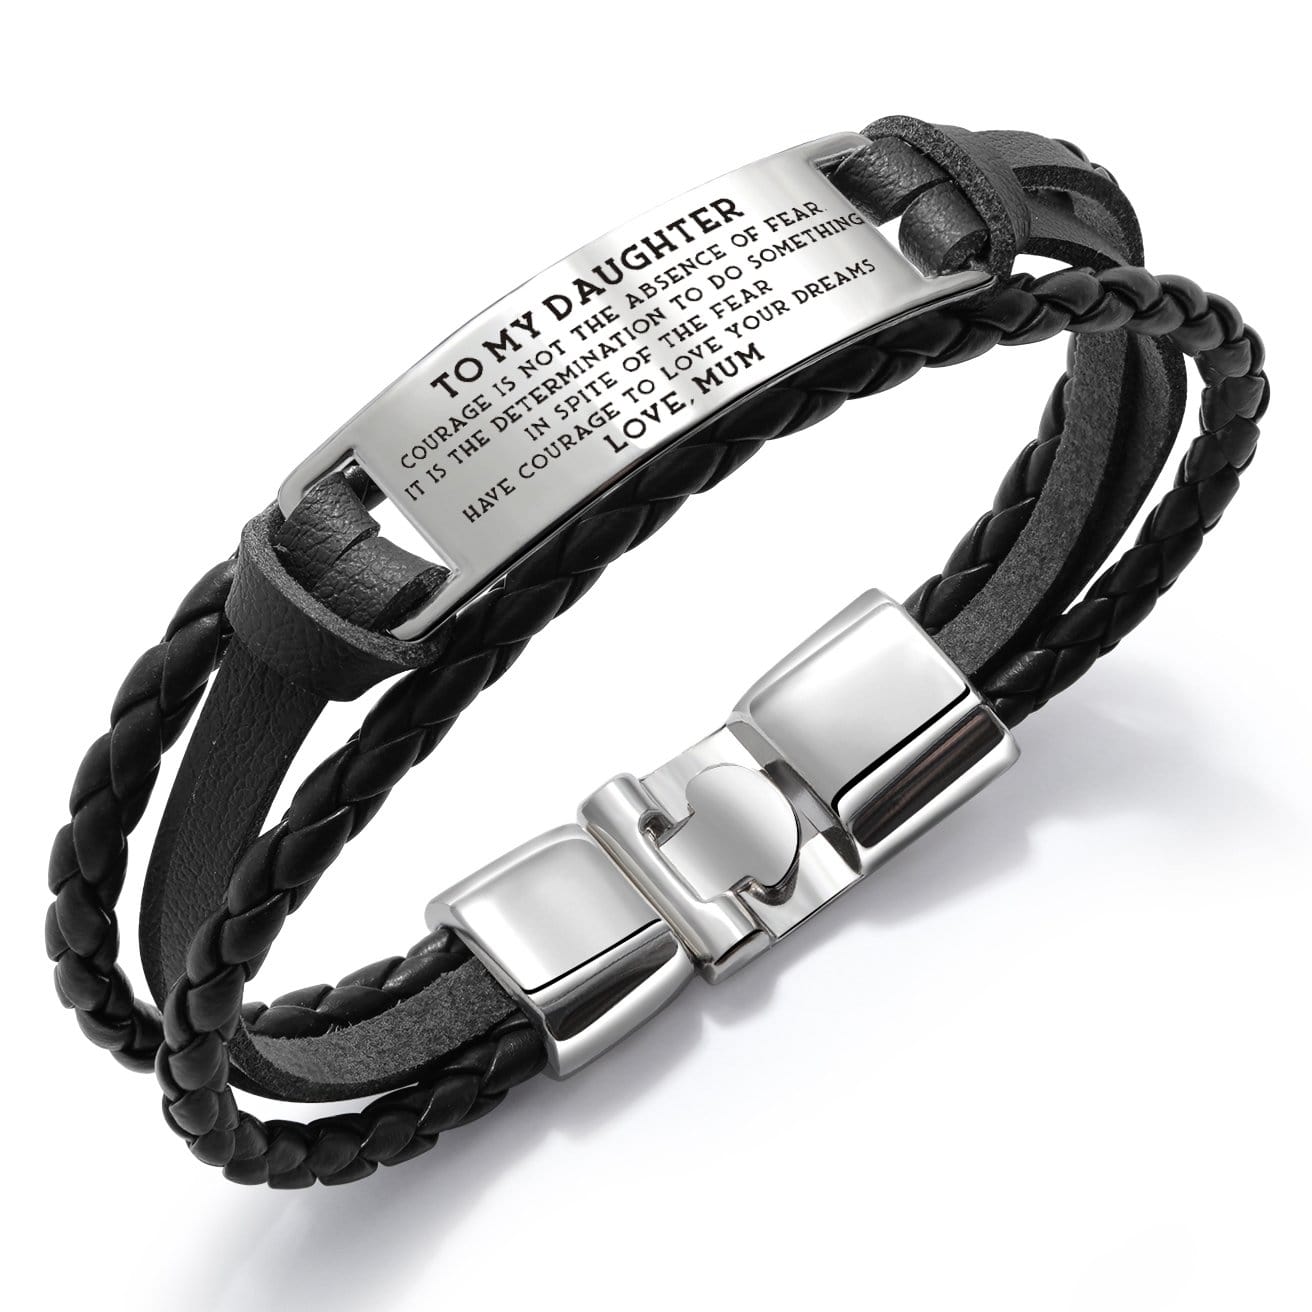 Bracelets Mum To Daughter - Have Courage To Love Your Dreams Leather Bracelet Black GiveMe-Gifts